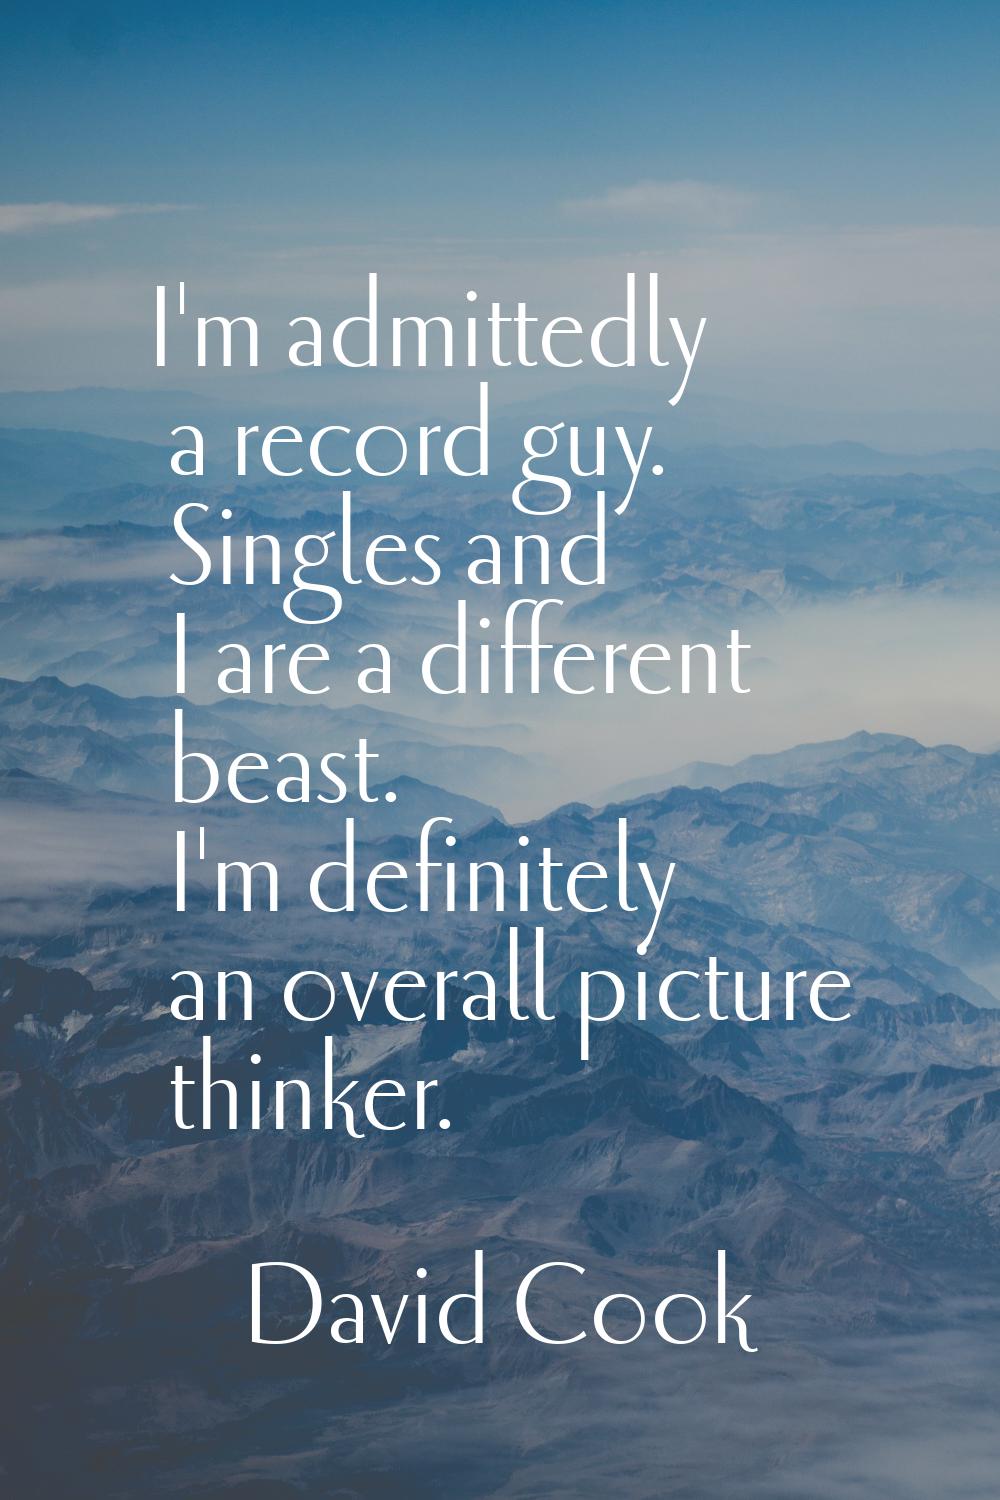 I'm admittedly a record guy. Singles and I are a different beast. I'm definitely an overall picture